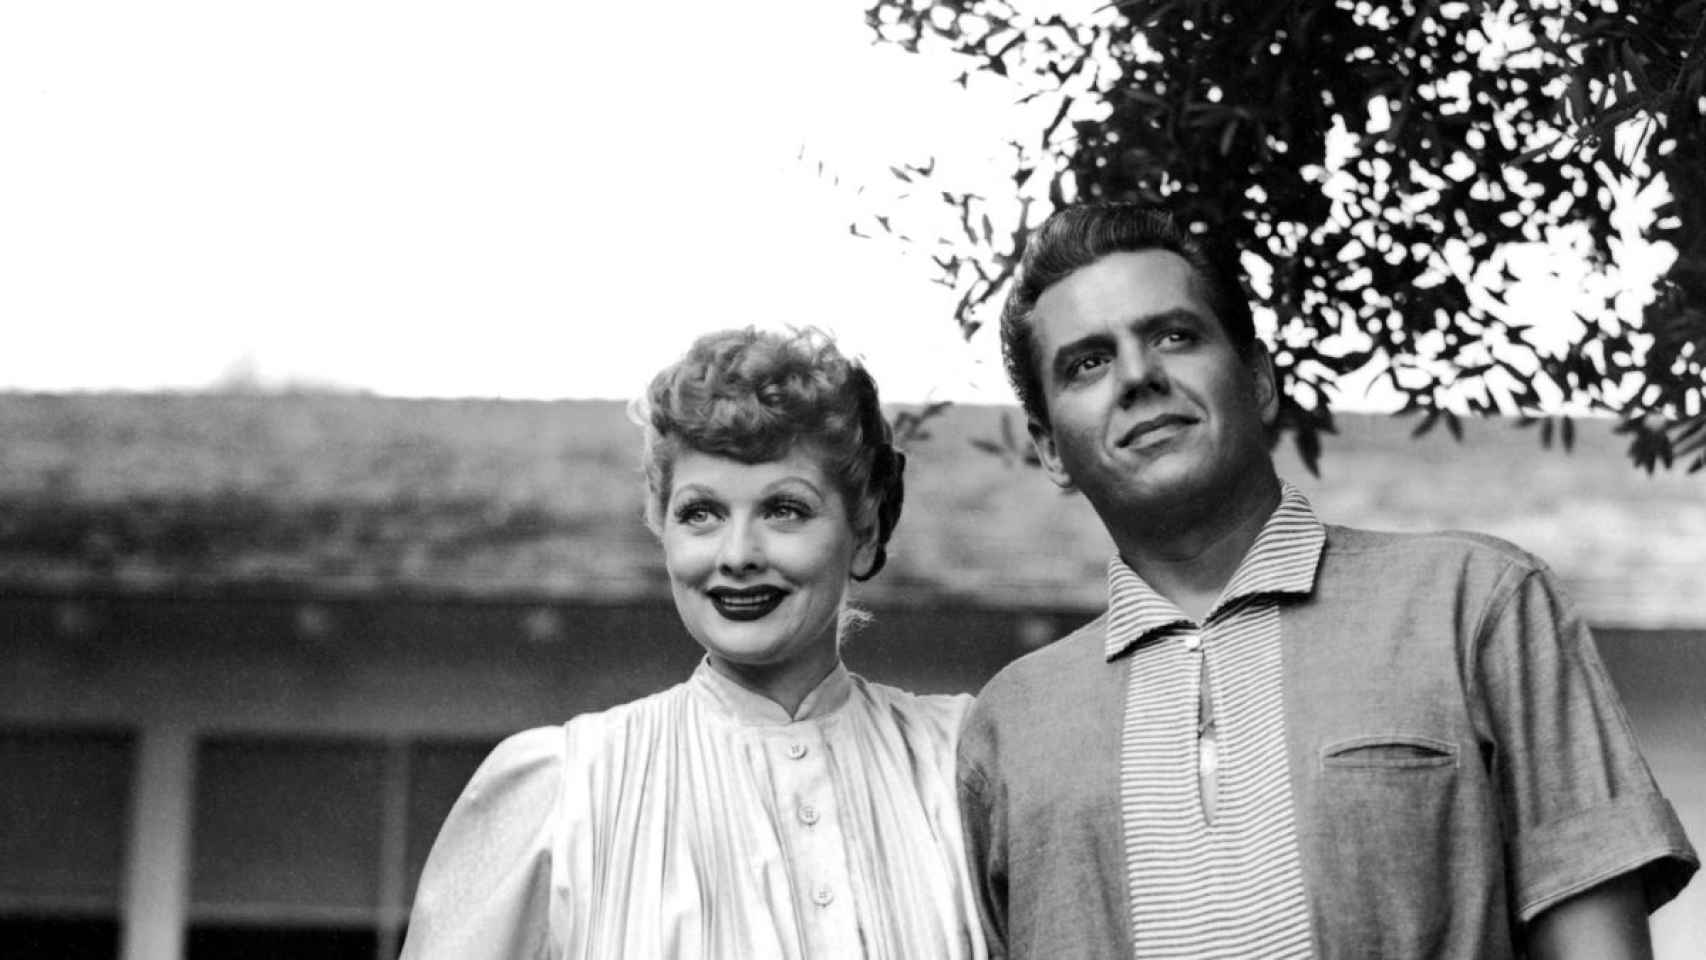 'Lucy and Desi'.